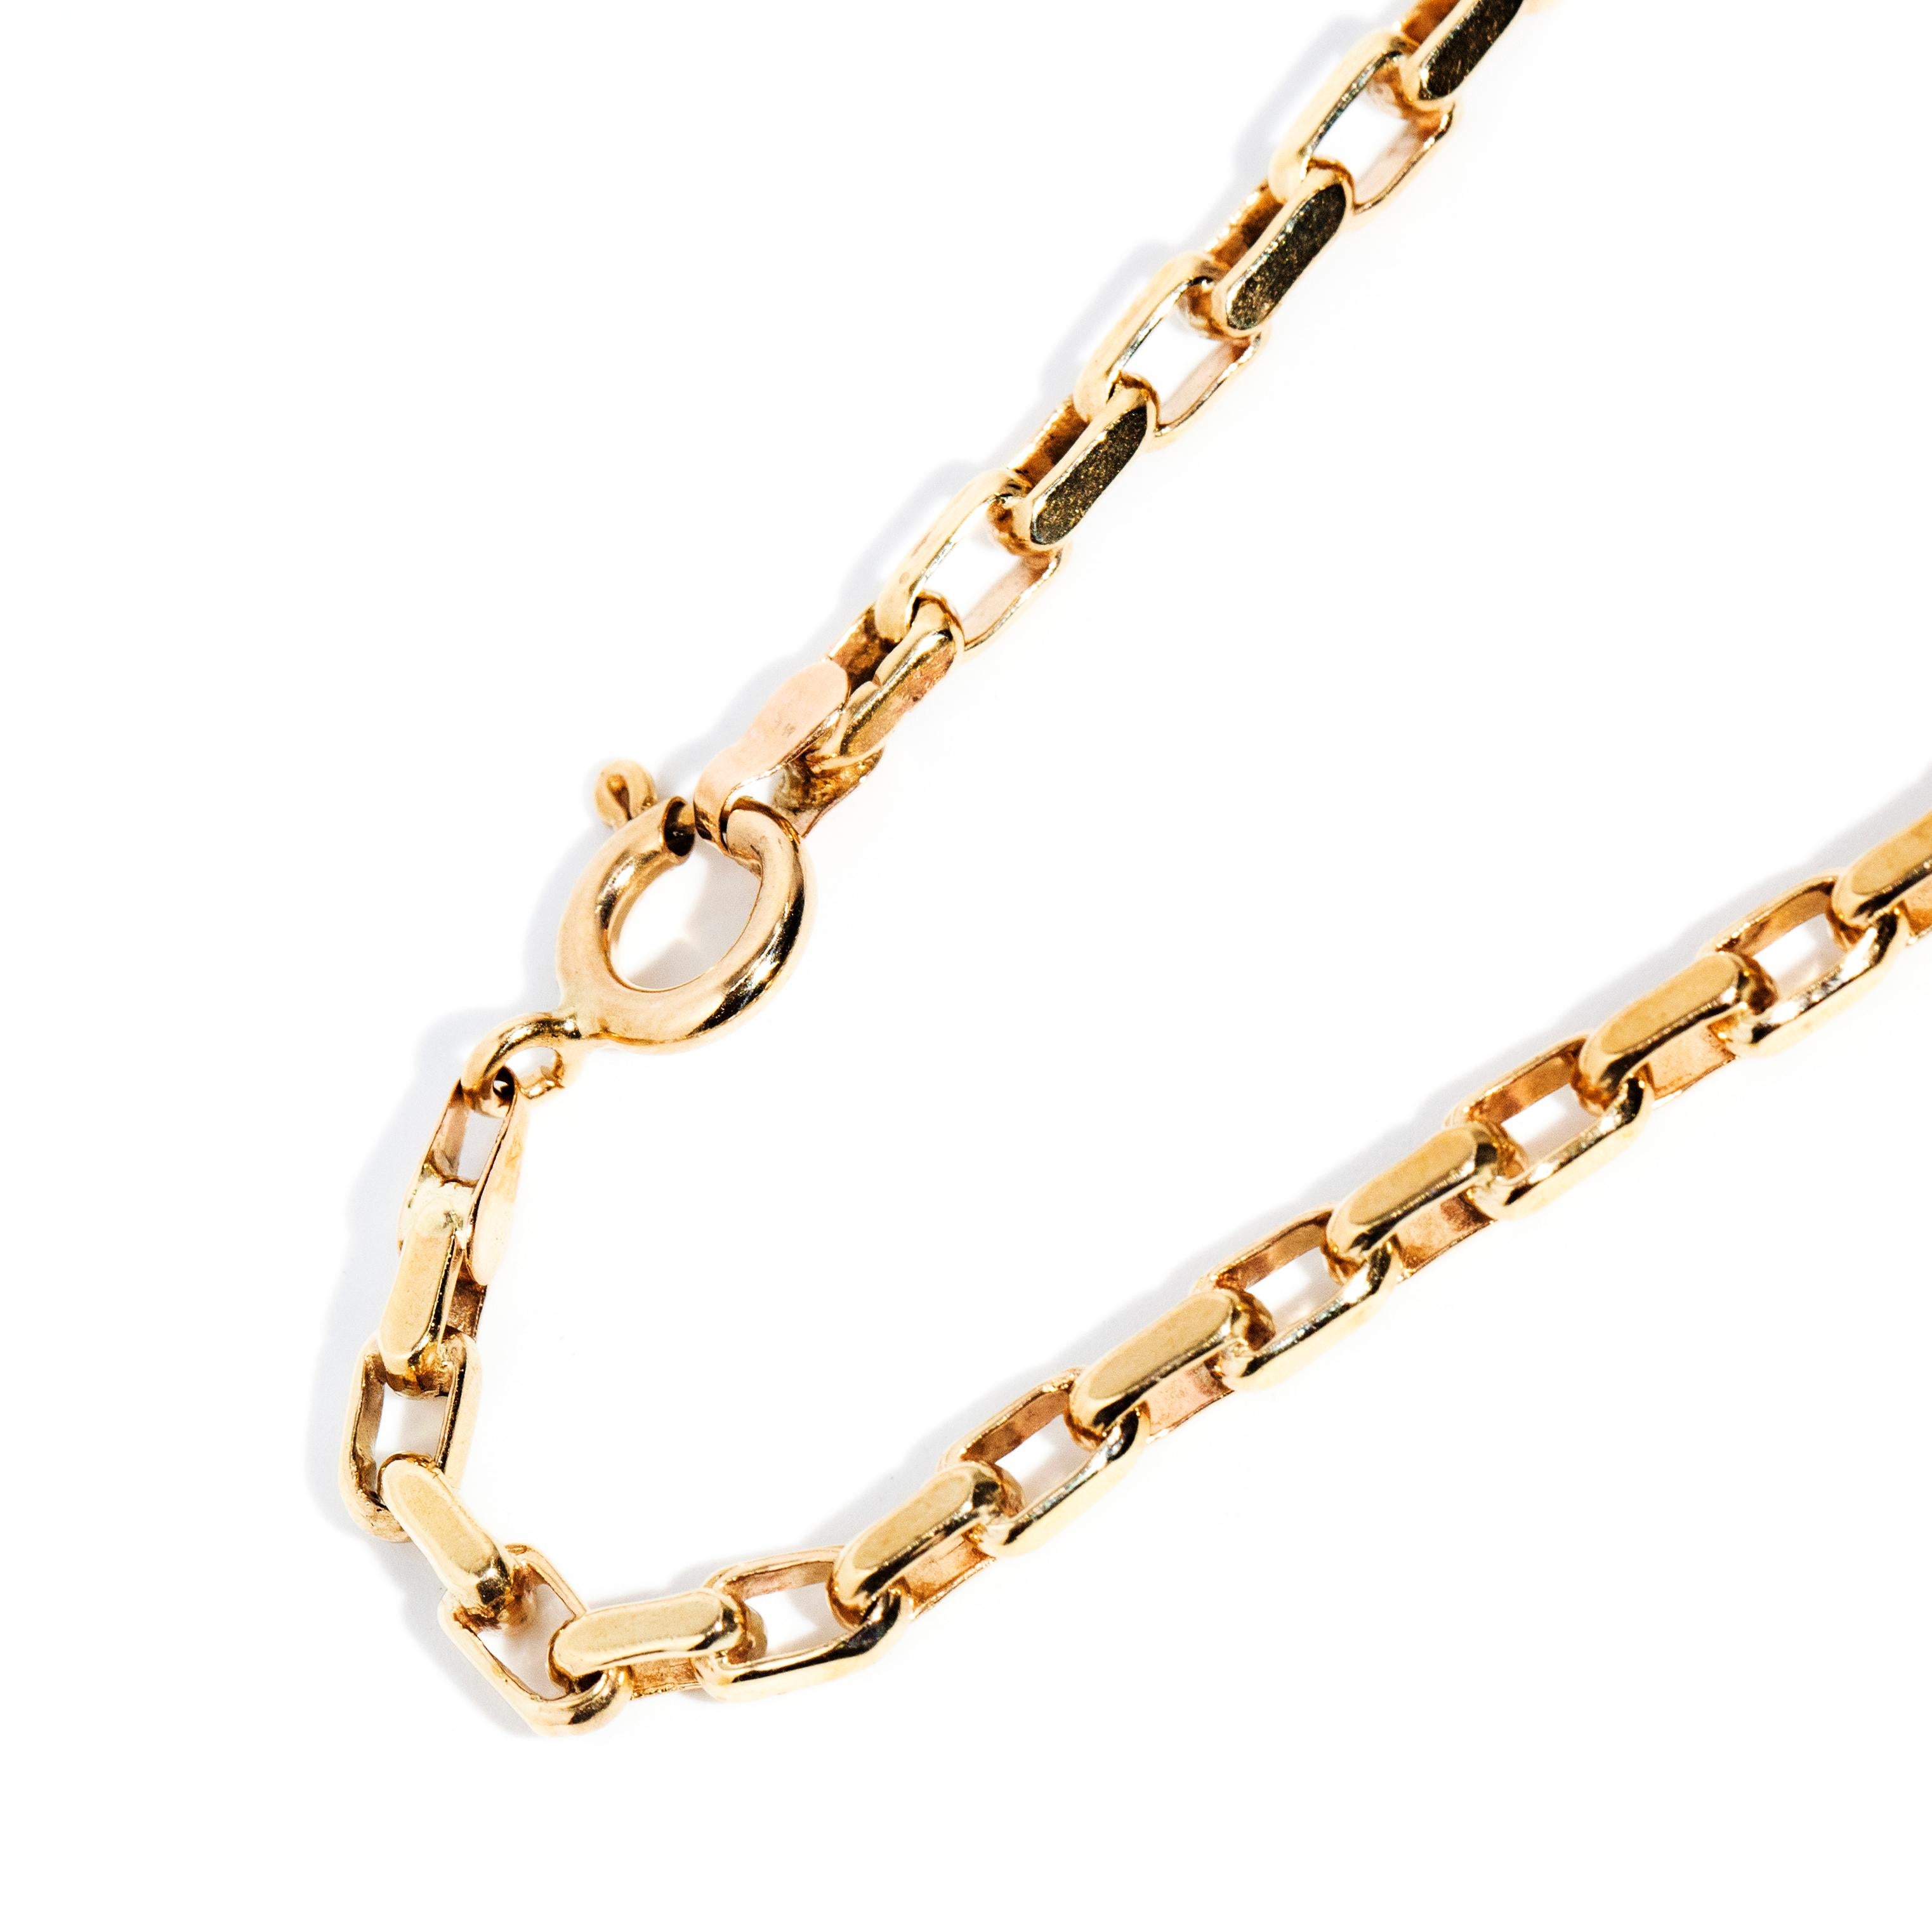 Vintage Circa 1980s Diamond Cut Heavy Oval Link Chain 9 Carat Yellow Gold For Sale 2